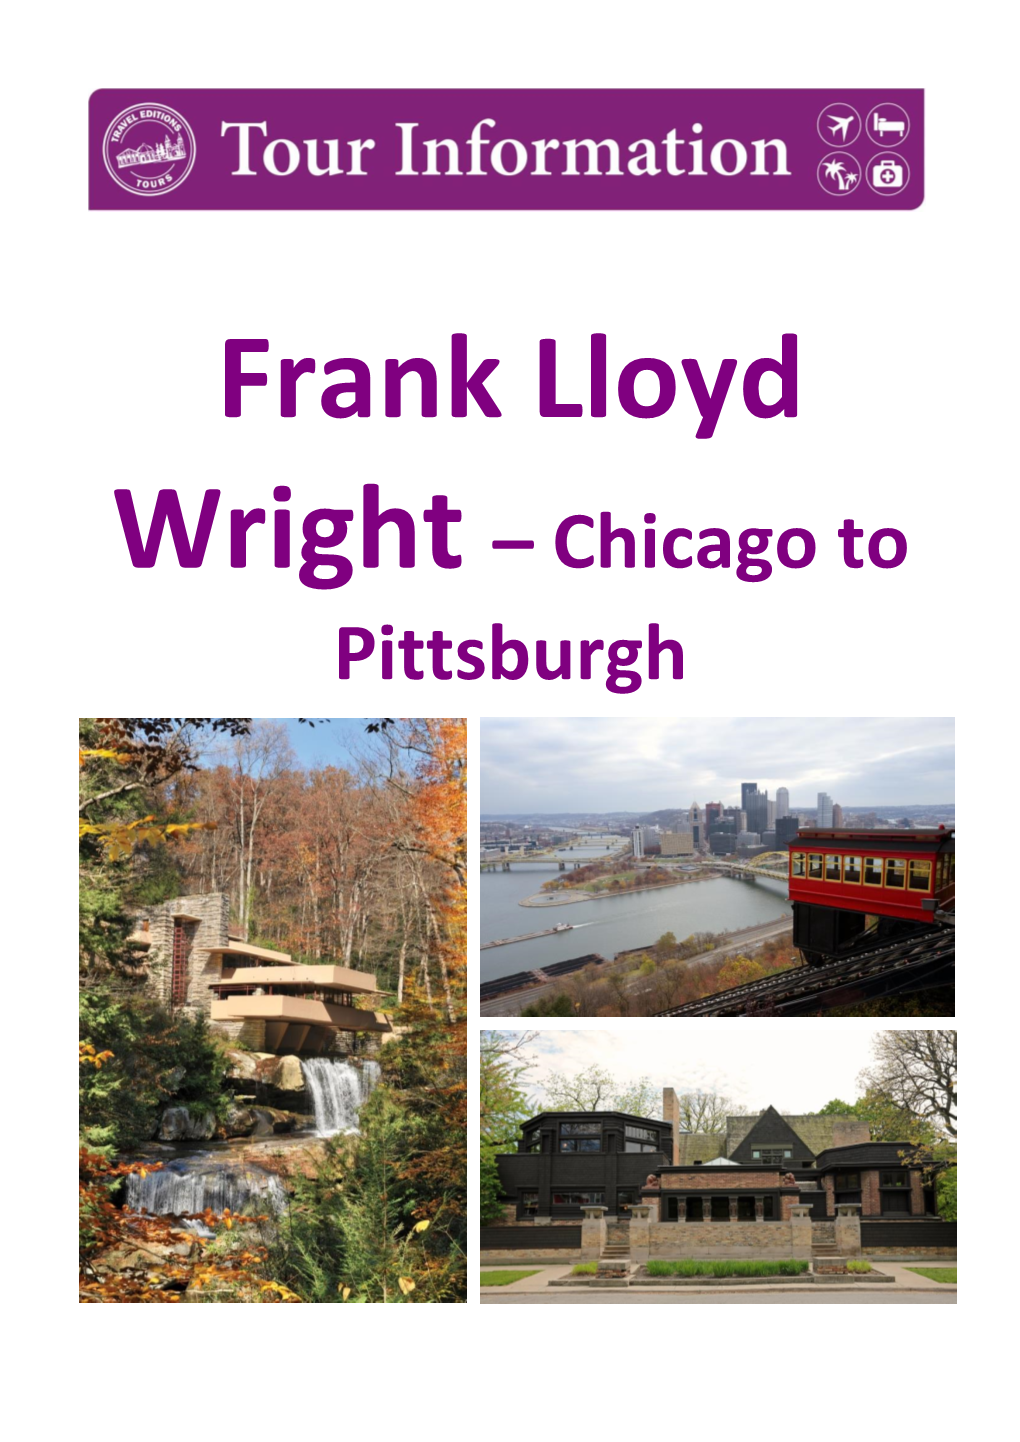 Frank Lloyd Wright – Chicago to Pittsburgh